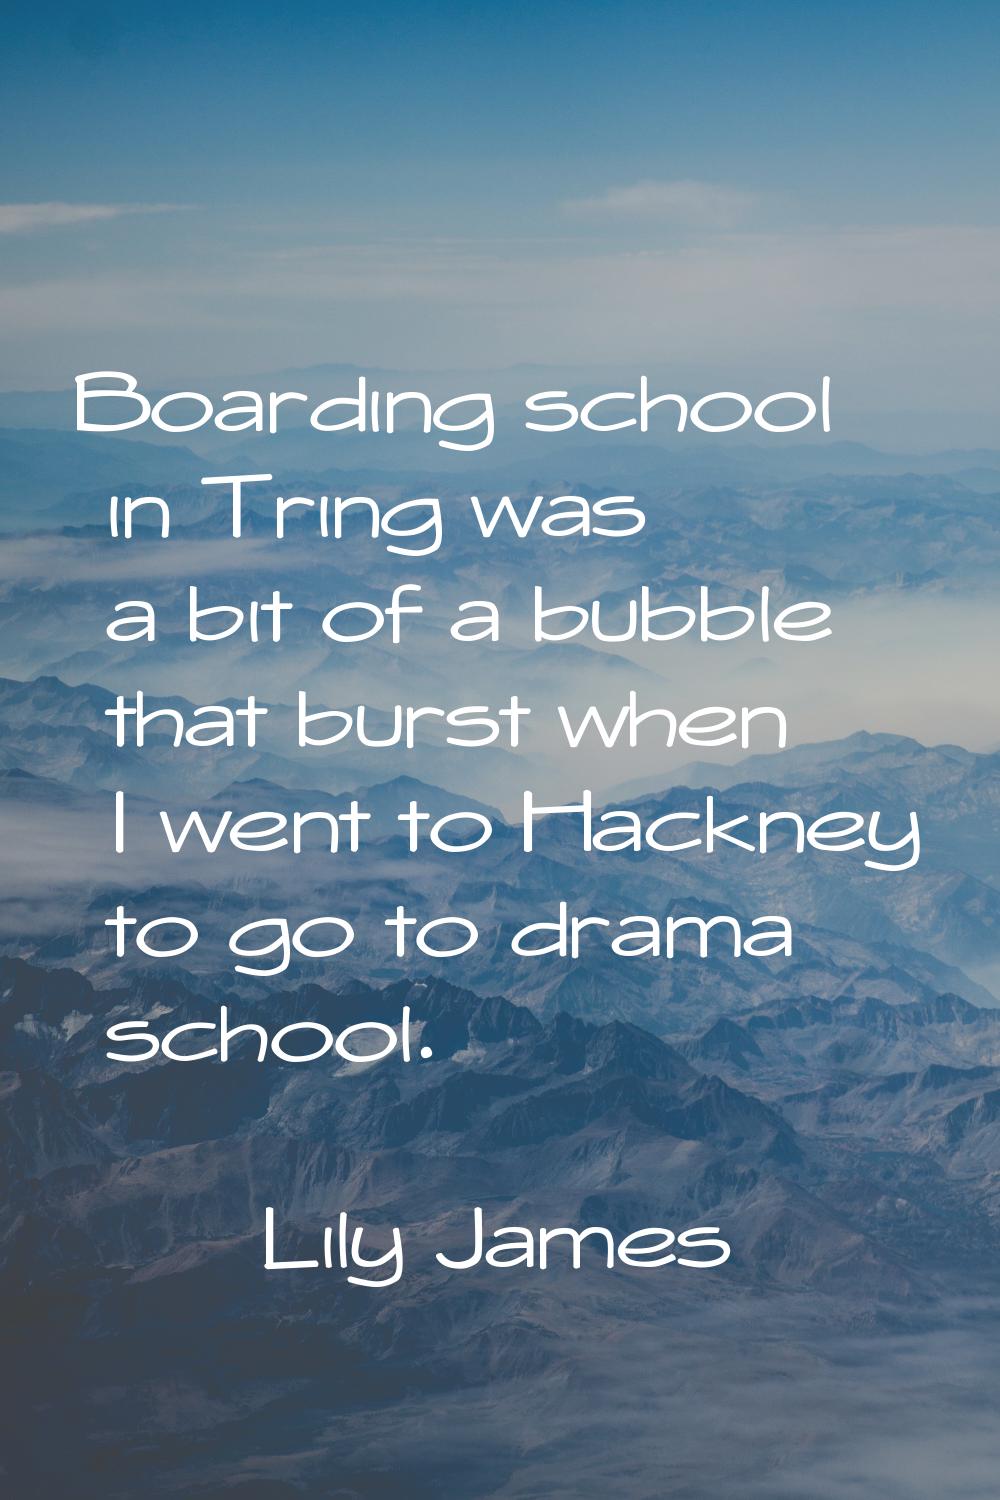 Boarding school in Tring was a bit of a bubble that burst when I went to Hackney to go to drama sch